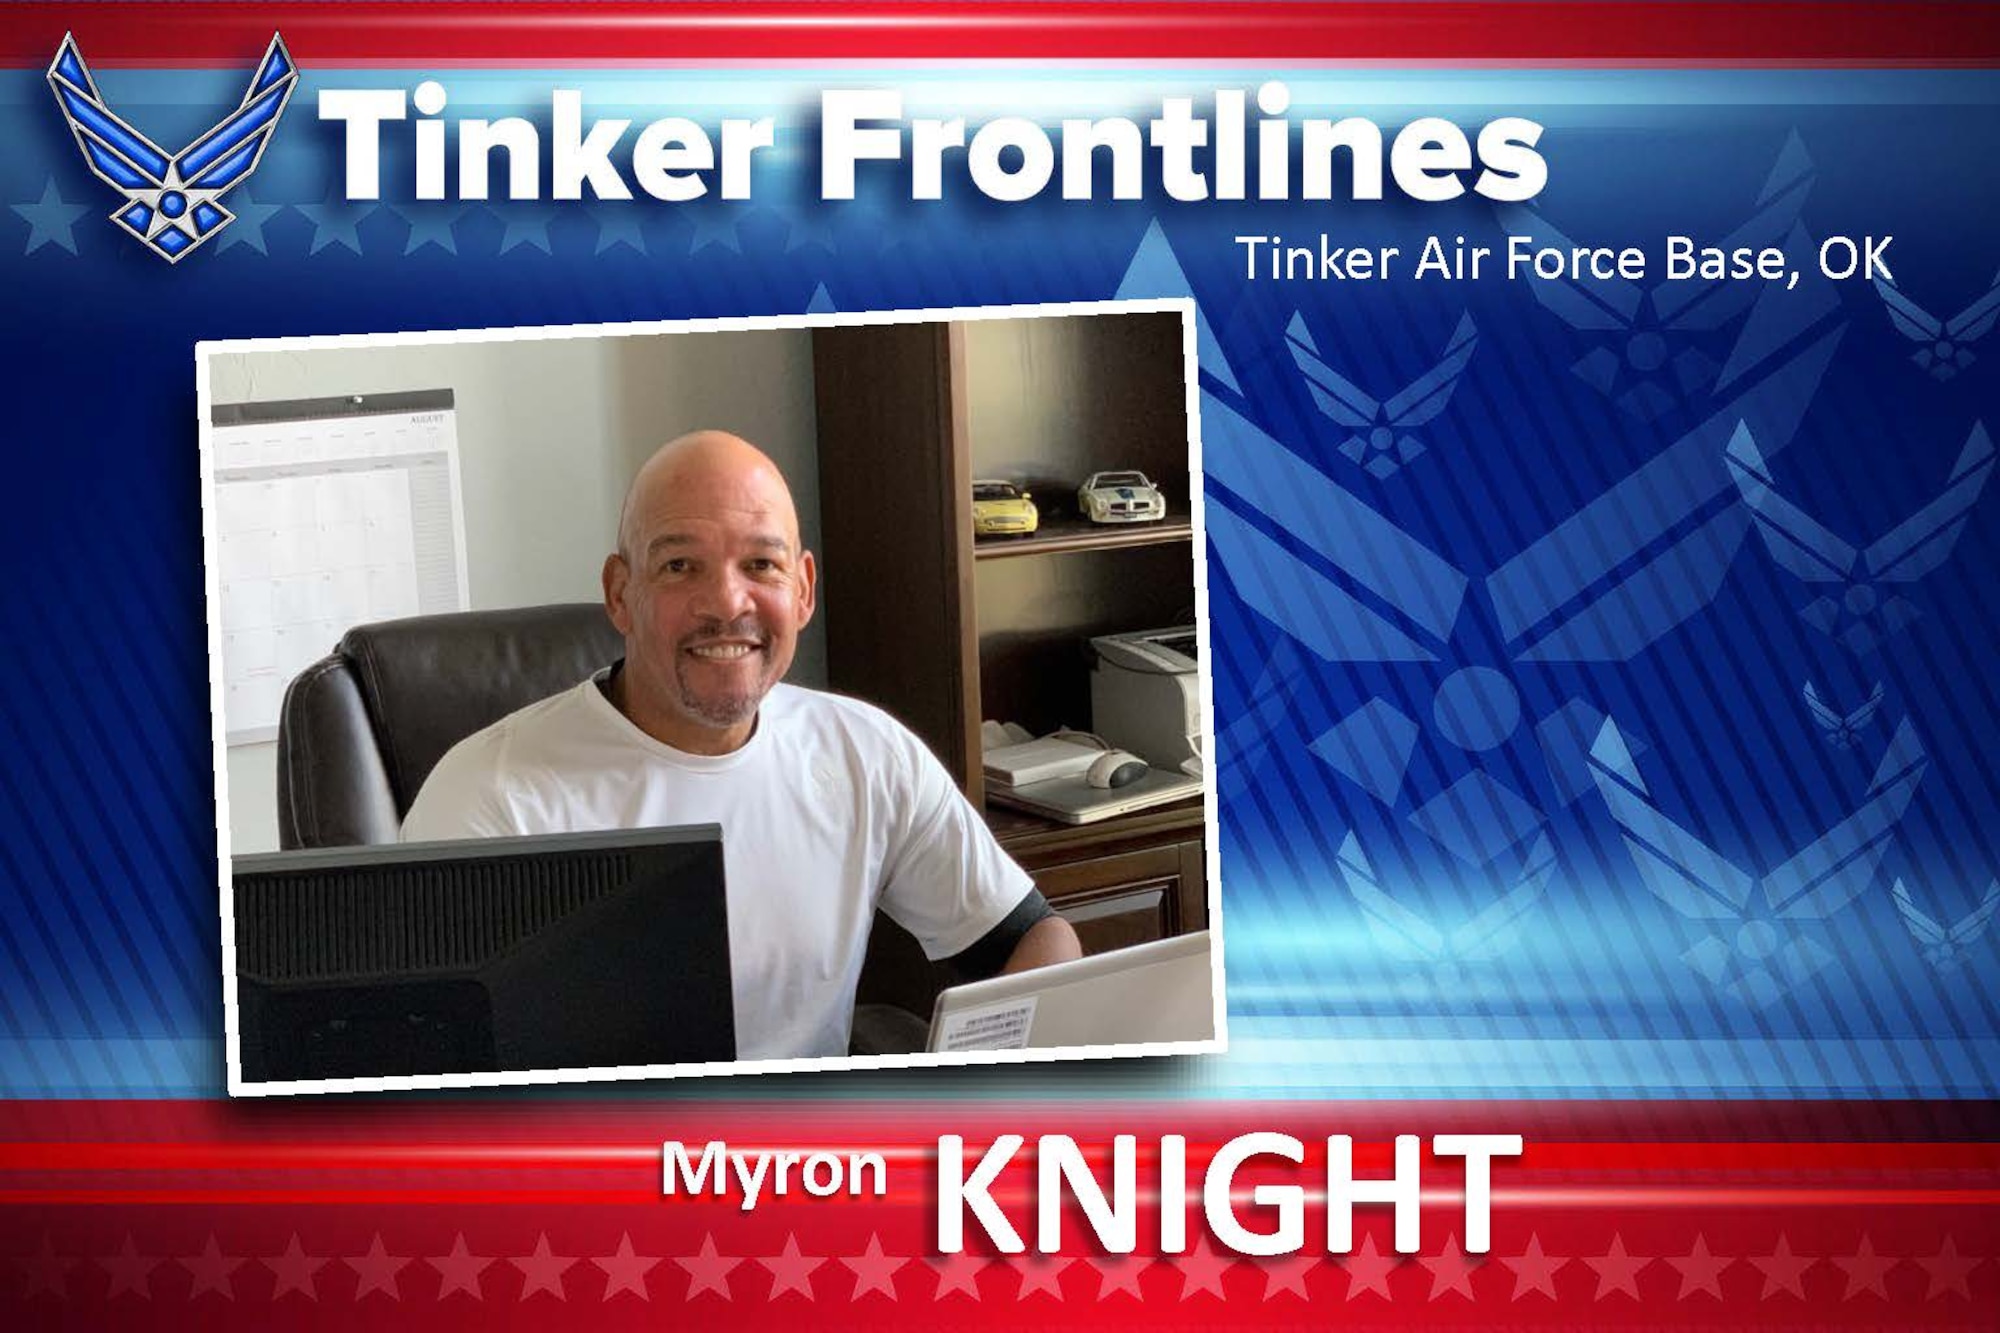 Graphic of Tinker Frontlines with photo of man in white shirt sitting at a desk behind a computer